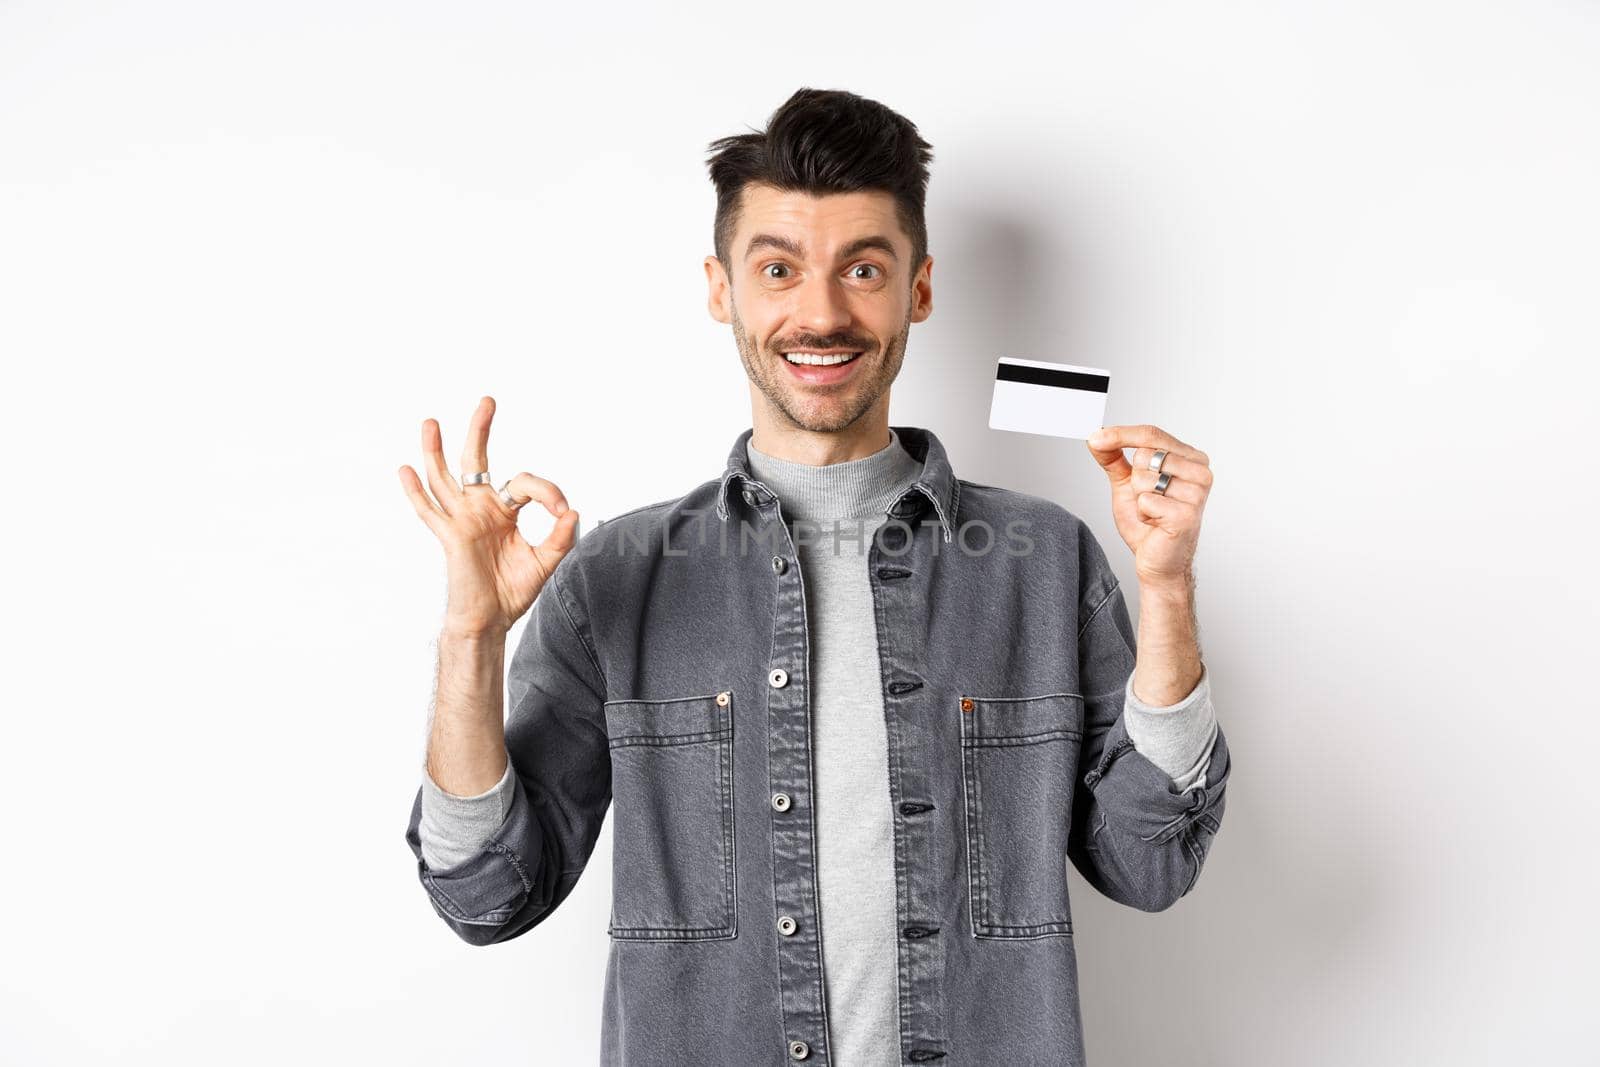 Very good. Smiling guy with plastic credit card showing okay sign, smiling satisfied, recommend bank, standing on white background.